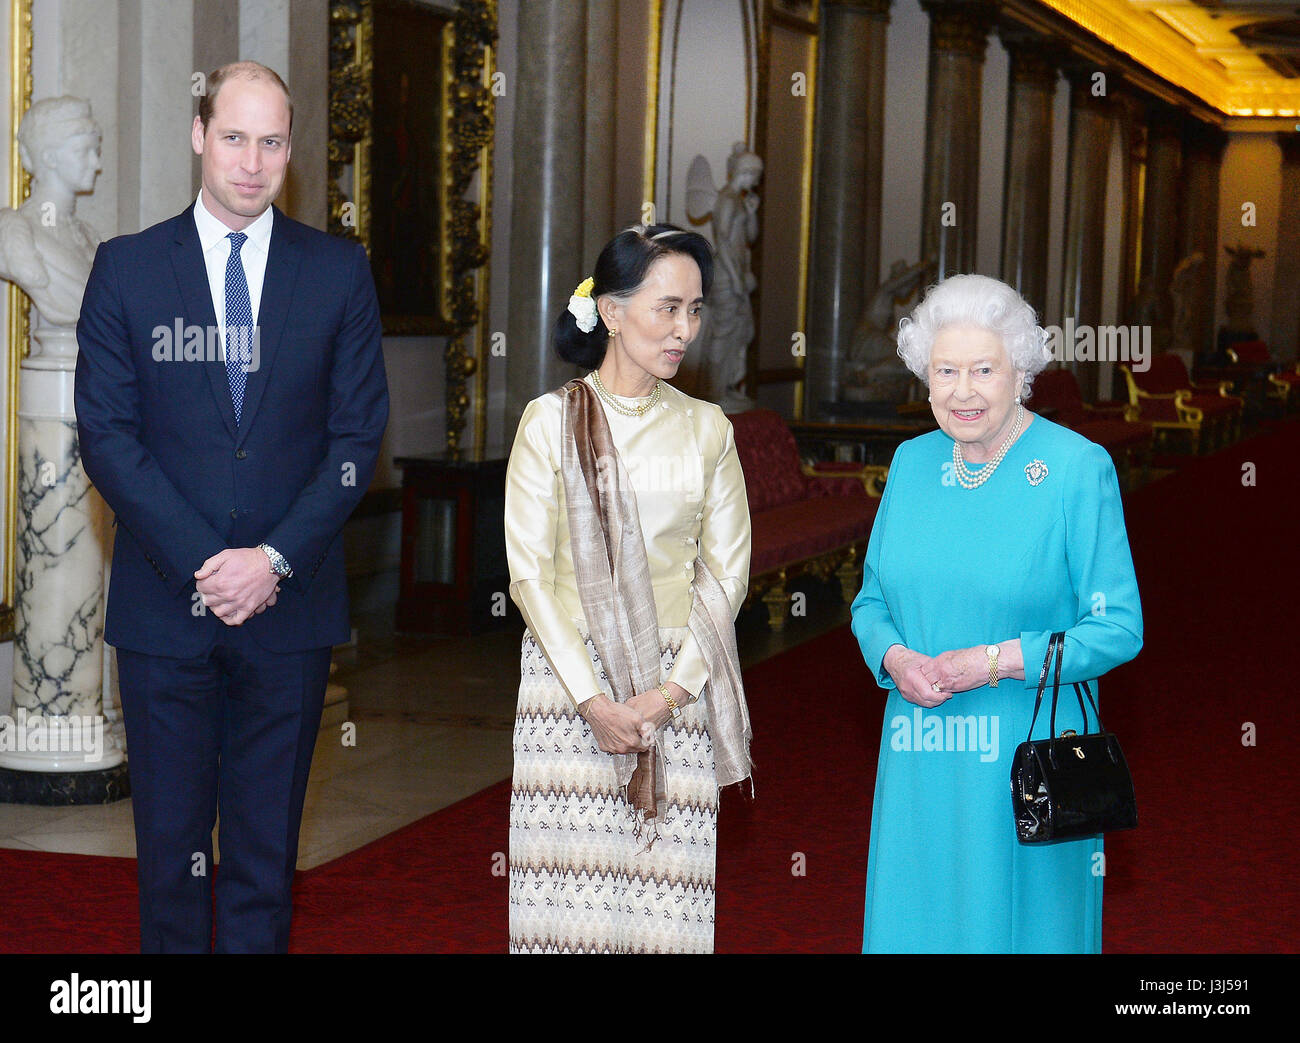 RETRANSMITTED CORRECTING LOCATION Queen Elizabeth II and the Duke of Cambridge greet Burma's de facto leader Aung San Suu Kyi ahead of a private lunch at Buckingham Palace in London. Stock Photo